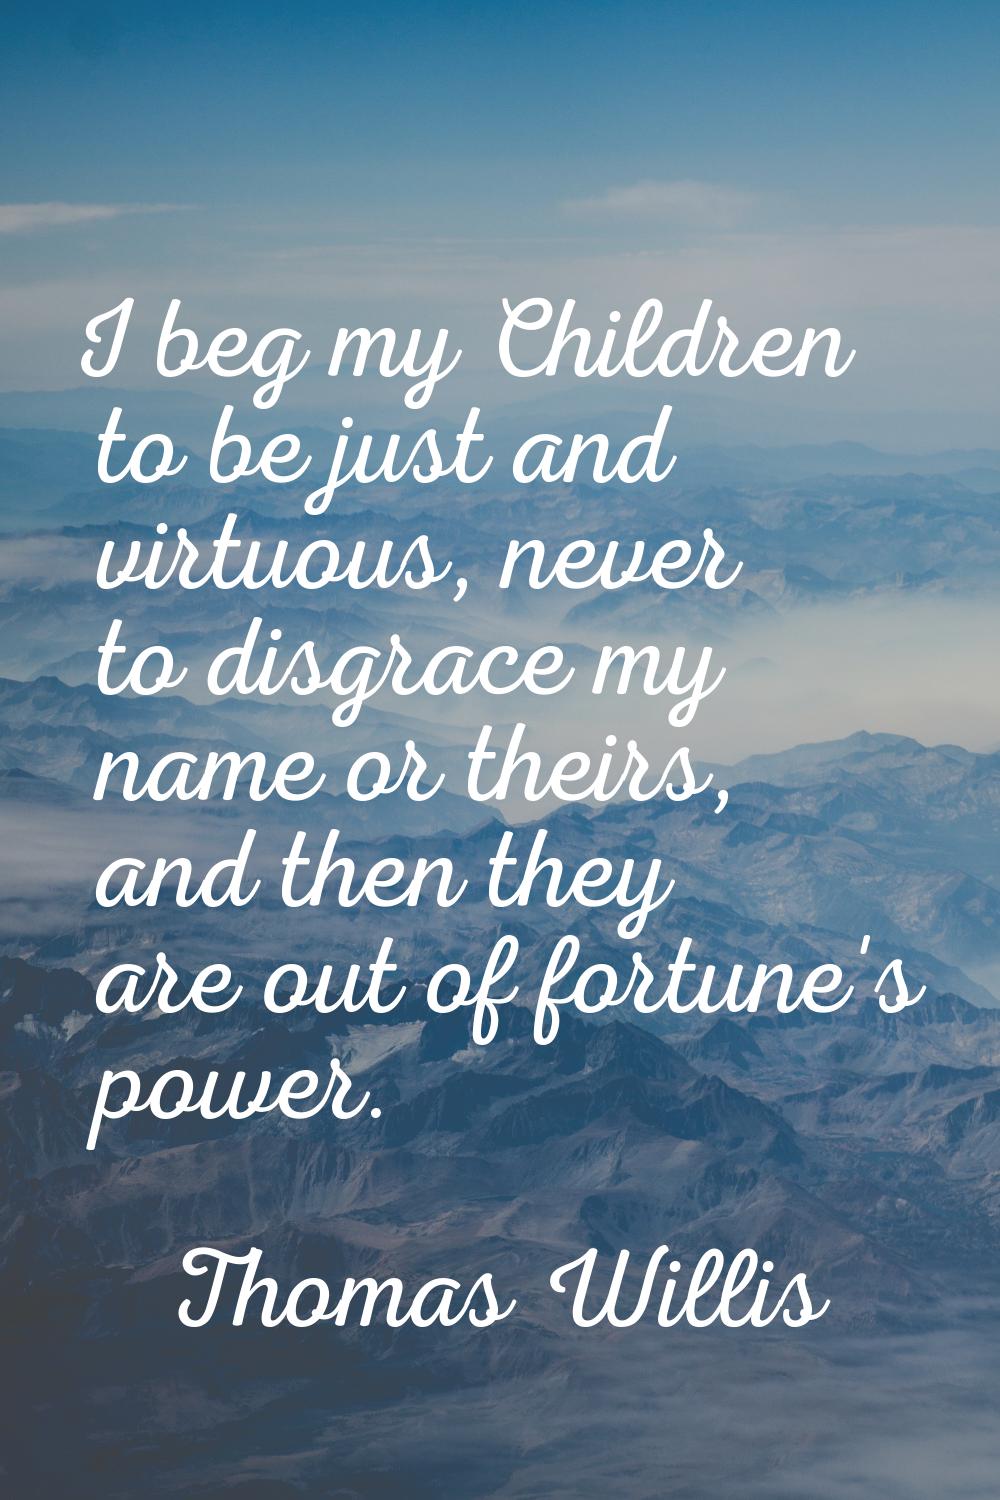 I beg my Children to be just and virtuous, never to disgrace my name or theirs, and then they are o